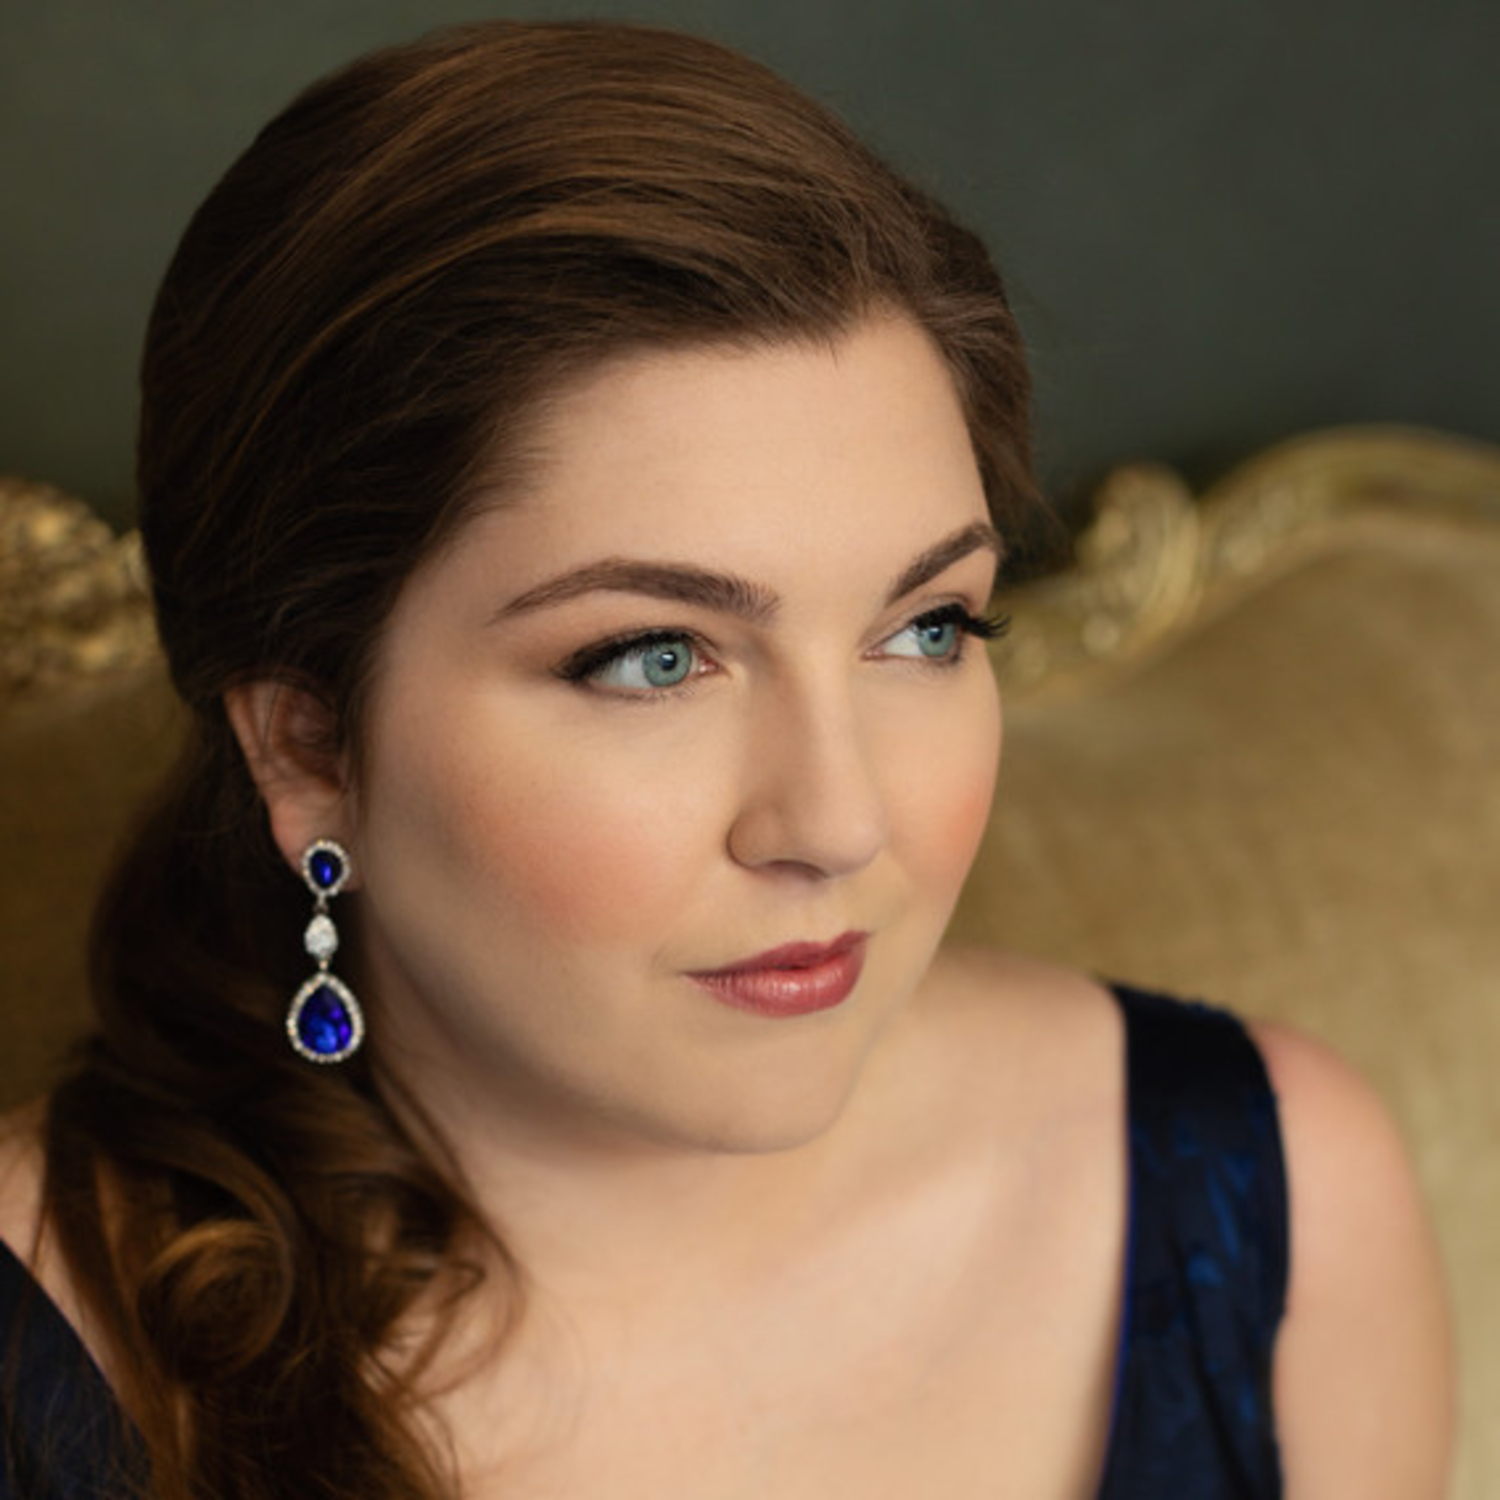 From May 30 to June 2, soprano Greer Lyle performs three hour-long concerts on the East End as part of The Hamptons Festival of Music's (TH·FM) program “Music Takes Flight! Italian Opera Through the Ages — Tour of the Hamptons.” KARISSA VAN TASSEL